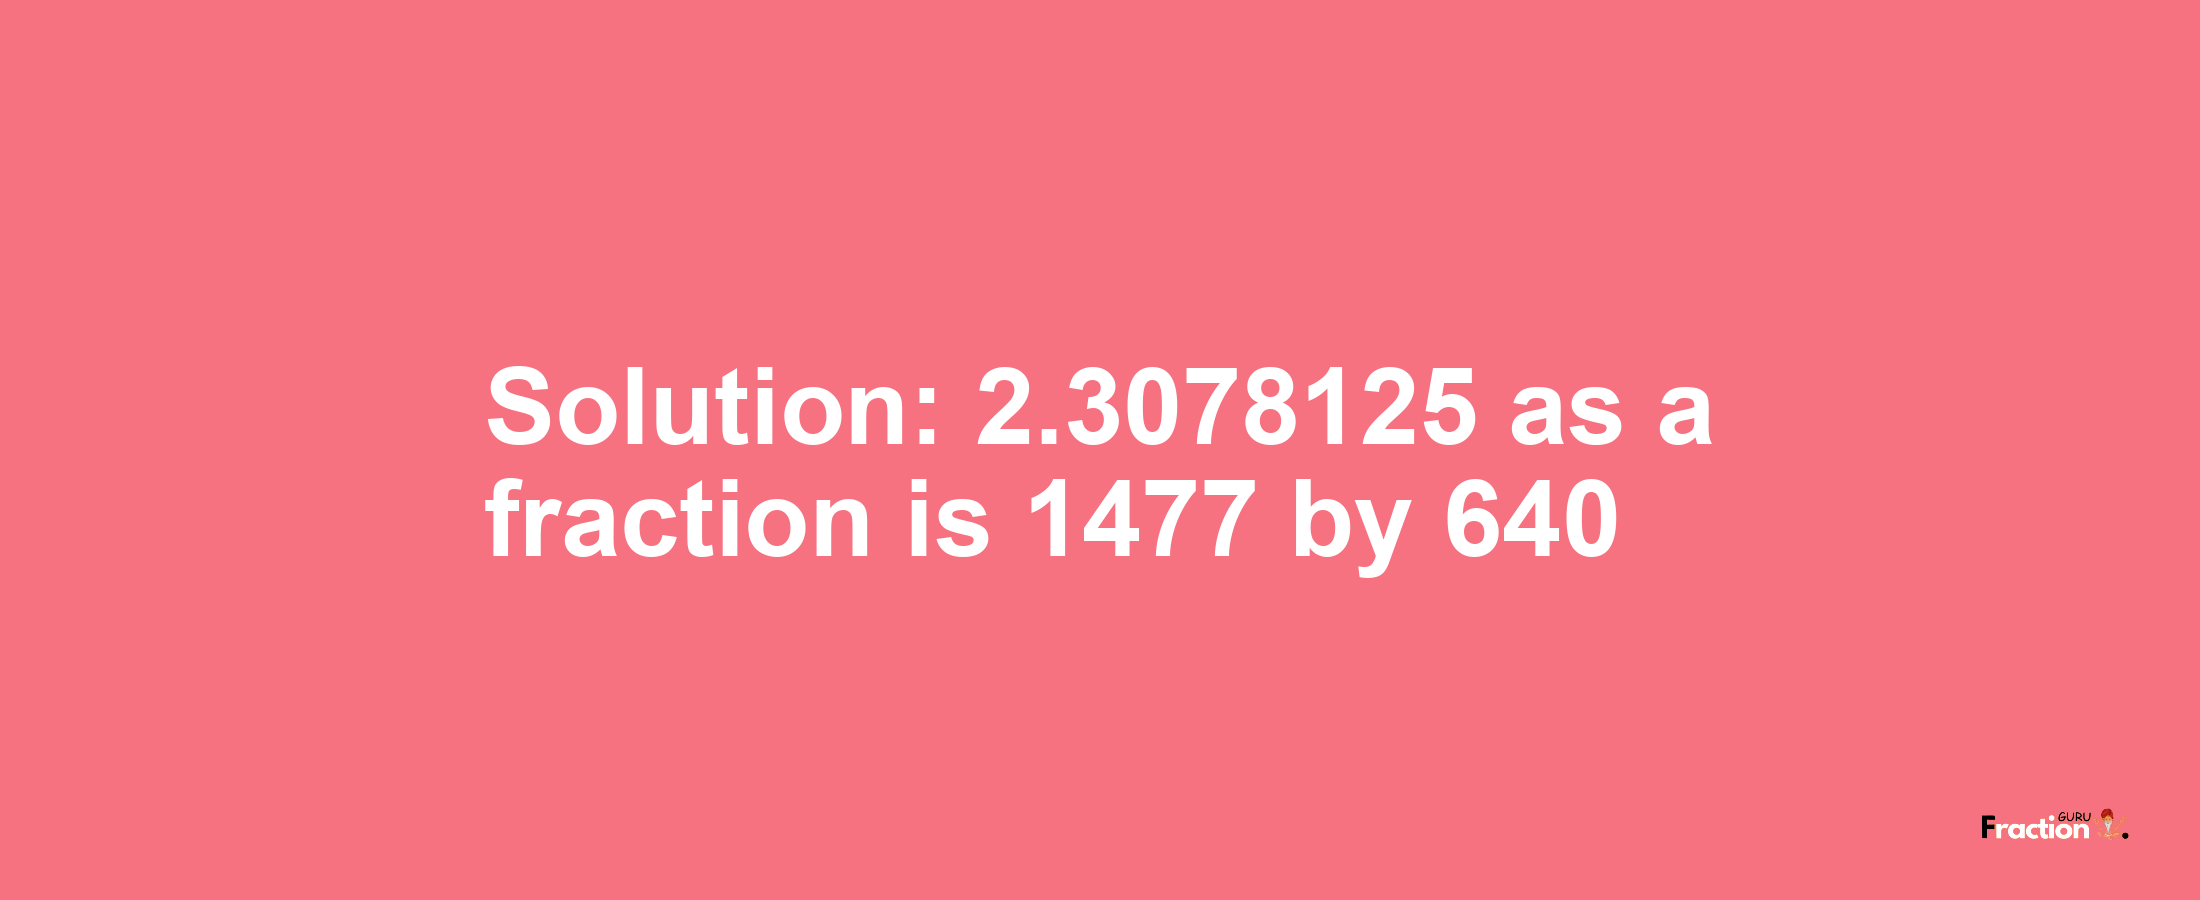 Solution:2.3078125 as a fraction is 1477/640